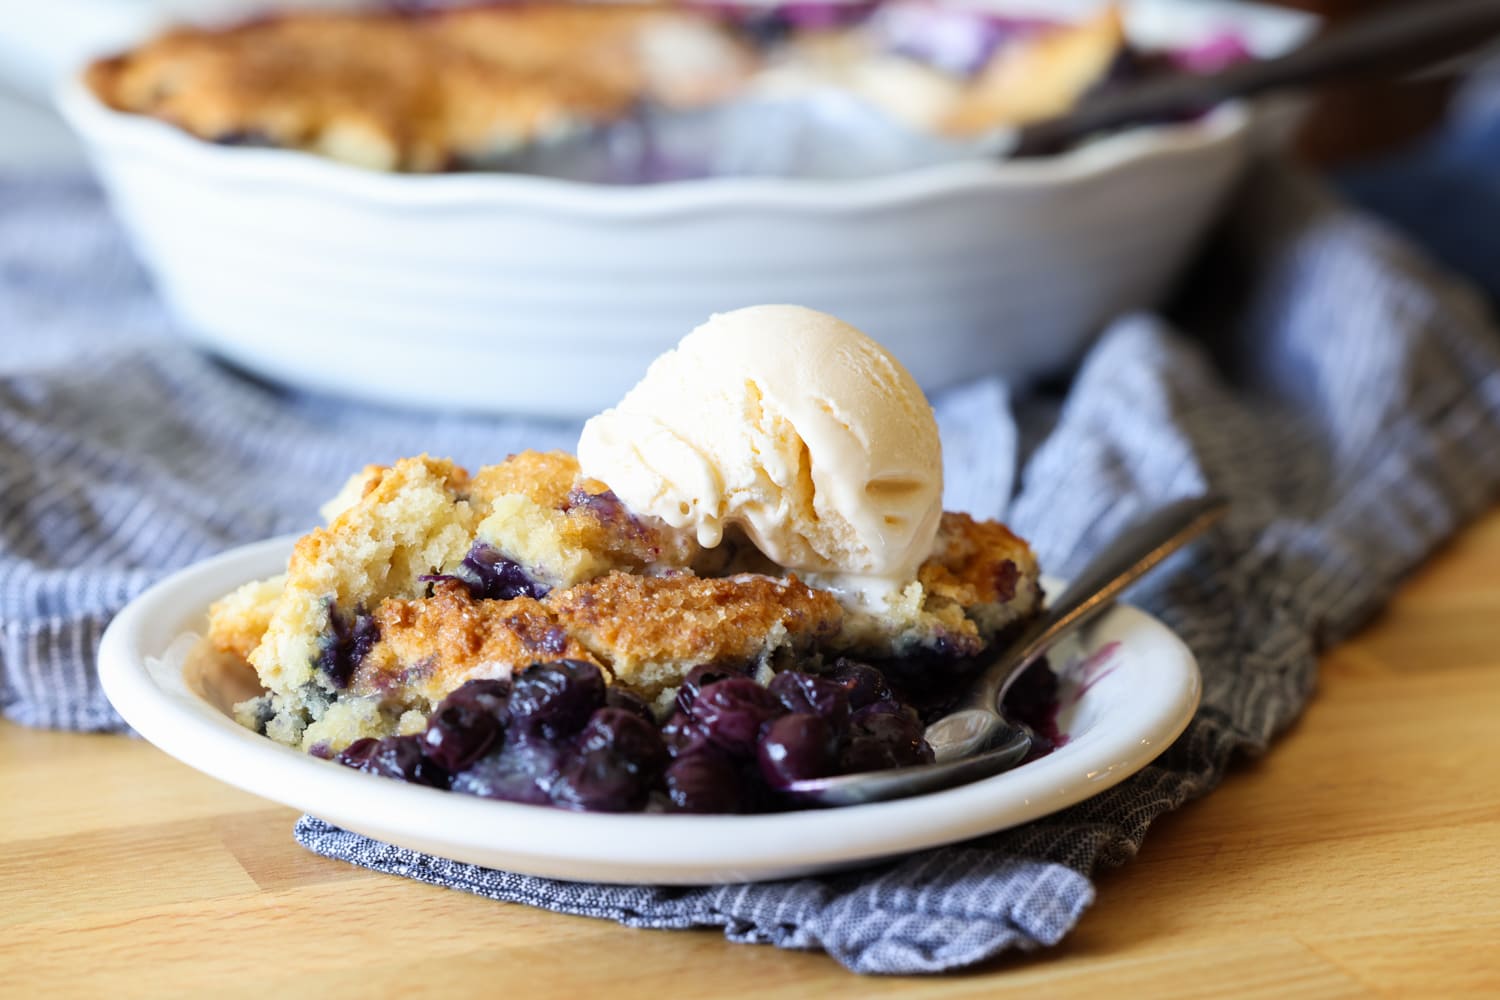 A piece of blueberry cobbler on a white plate with a scoop of ice cream